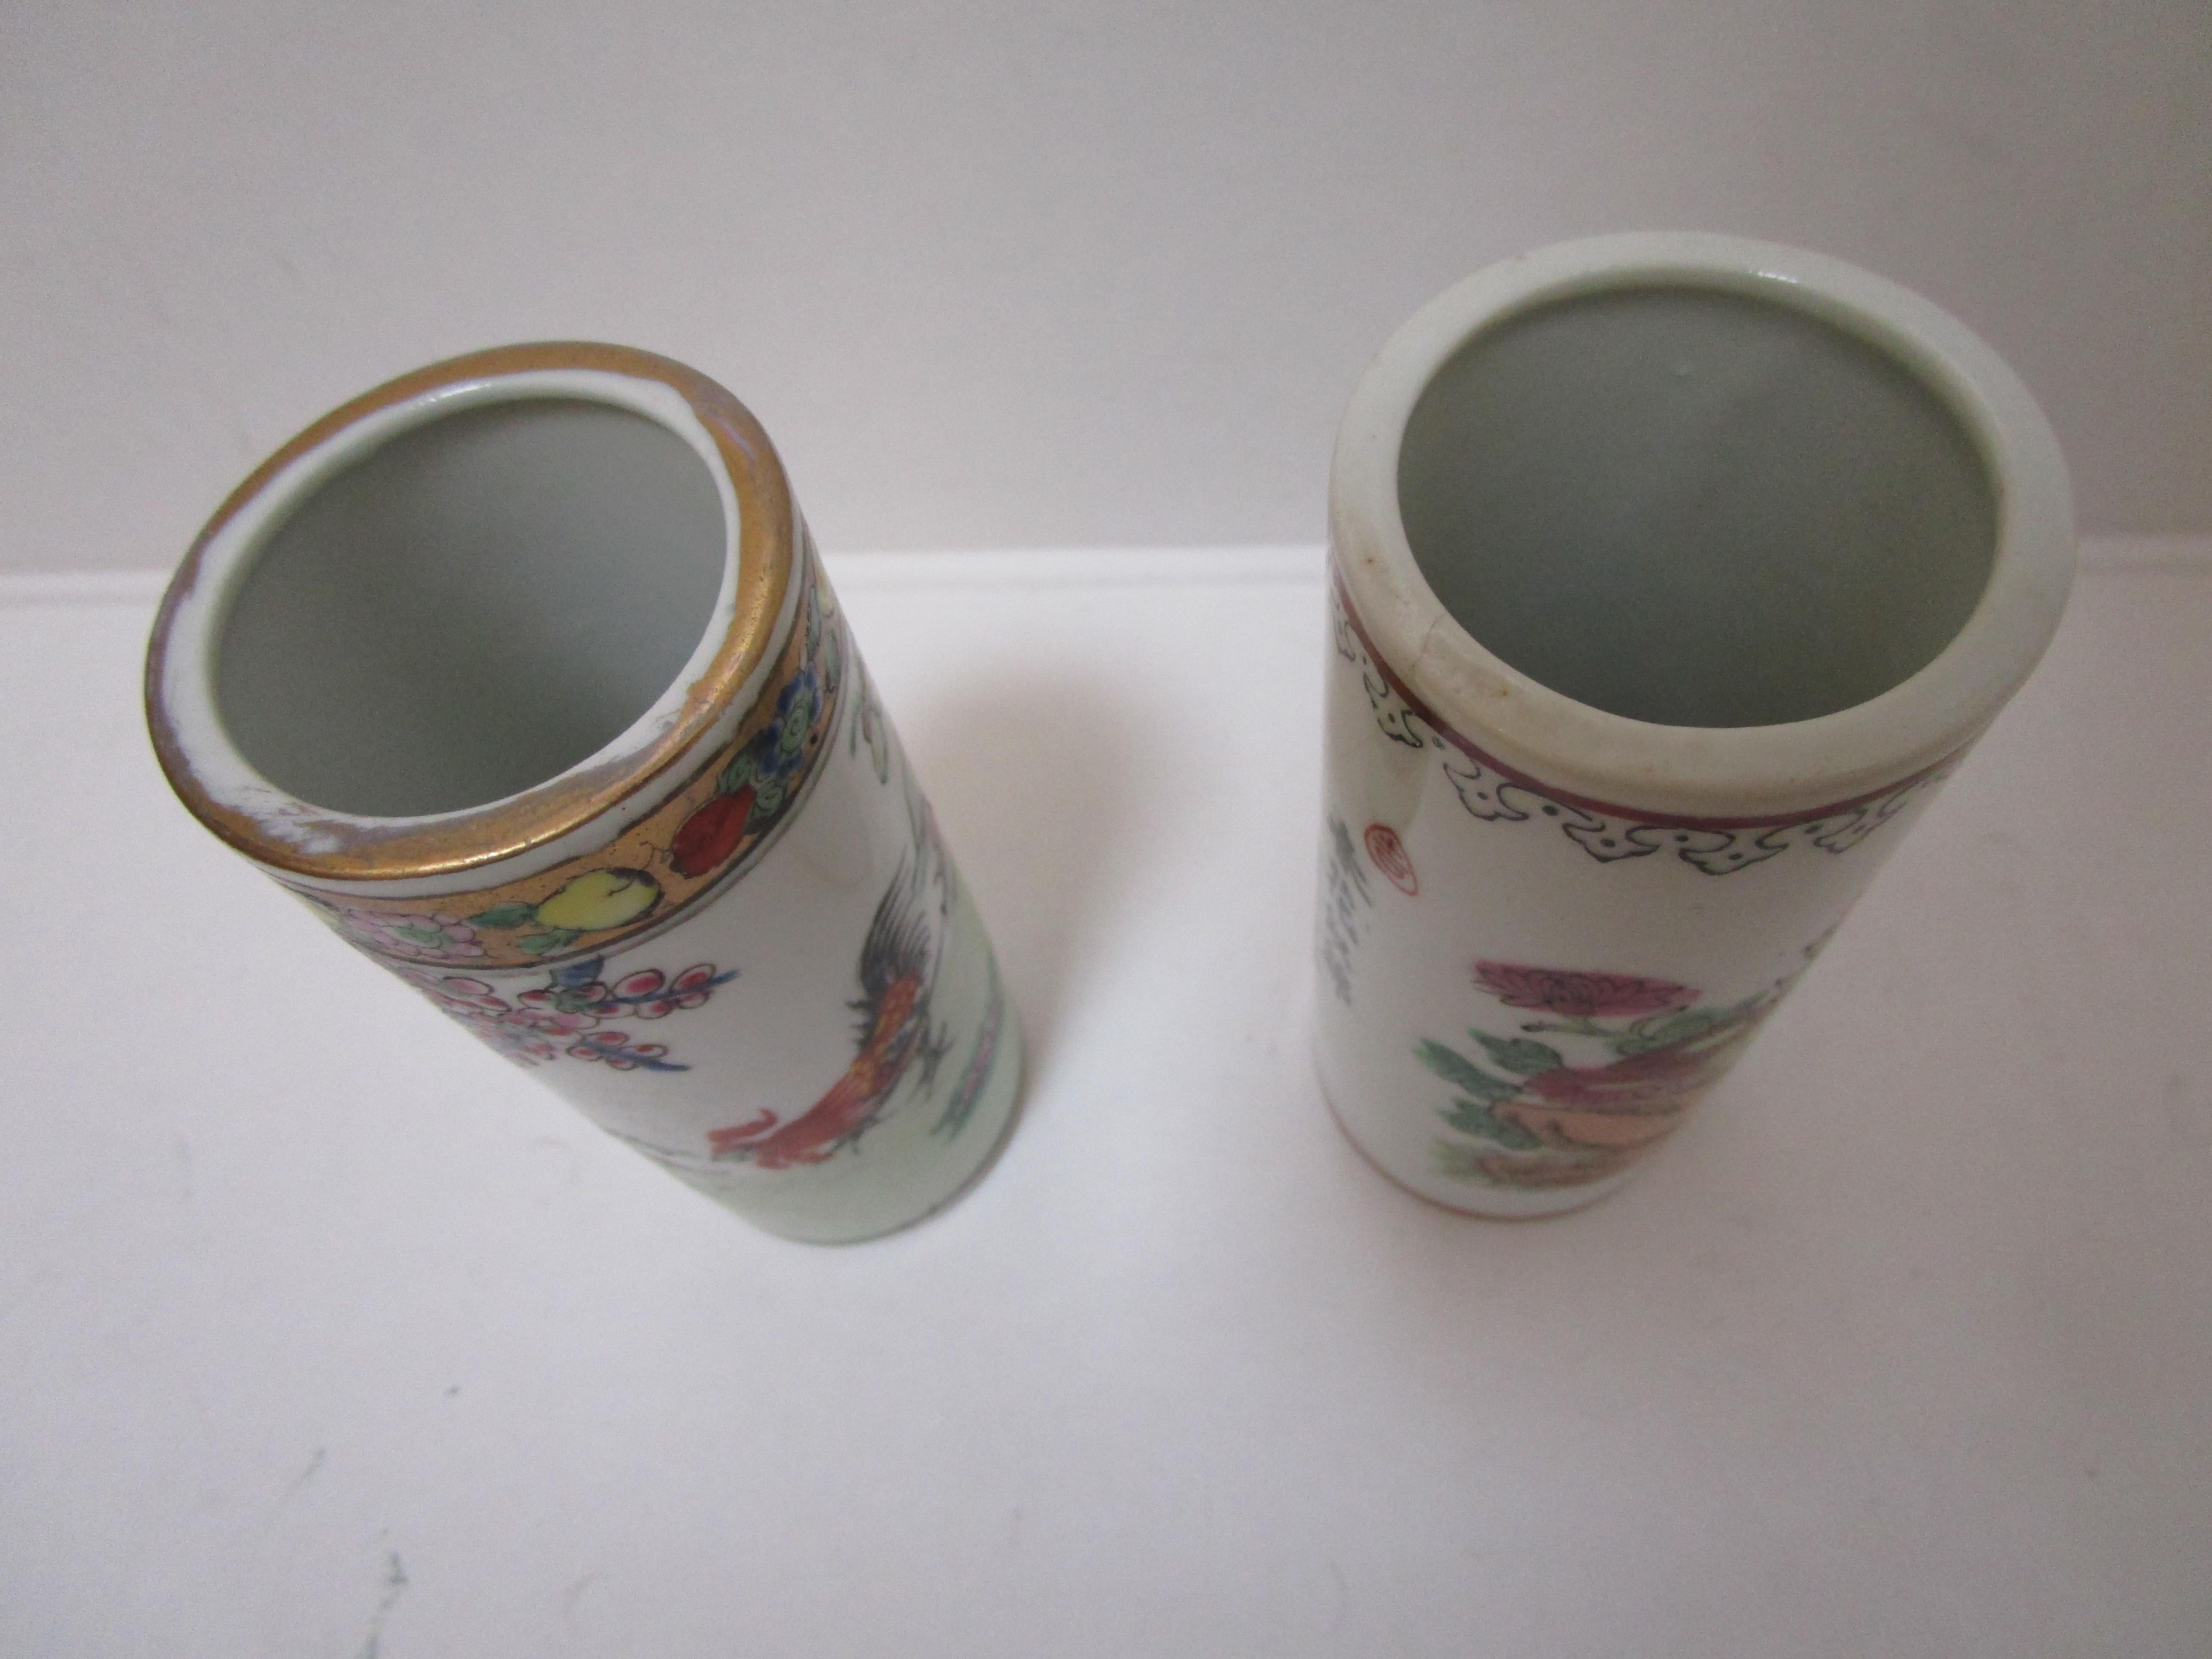 Pair of Famille Rose Antique Cylindrical Brush Pots with Two-Verse Poem In Good Condition For Sale In Lomita, CA